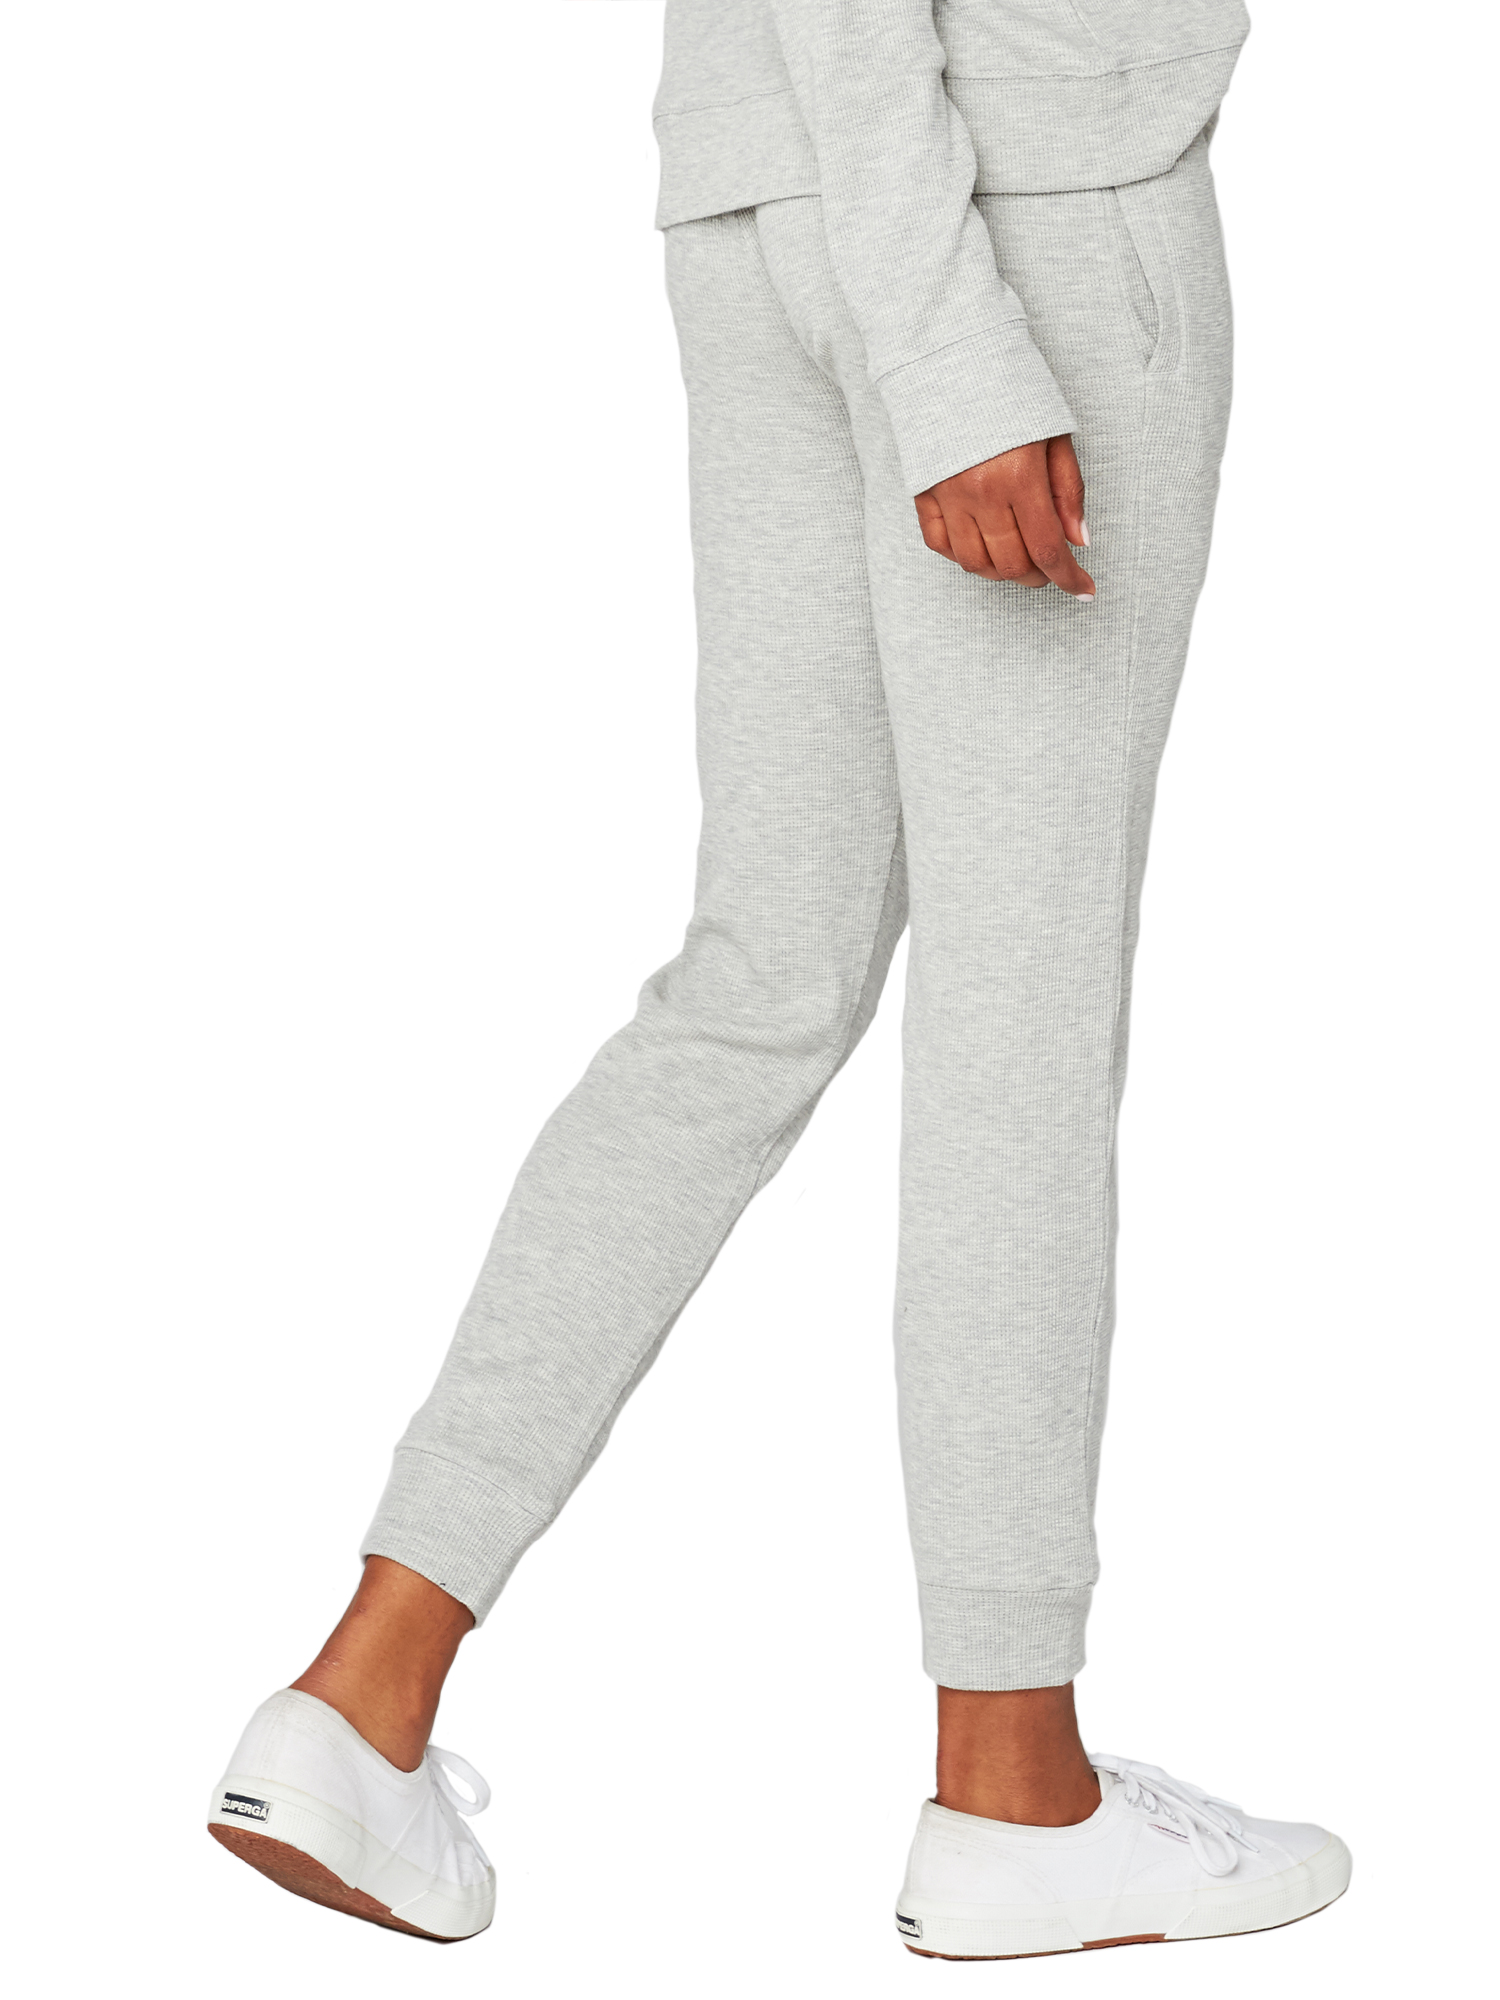 Threads 4 Thought Women's Athleisure Thermal Jogger - image 2 of 3